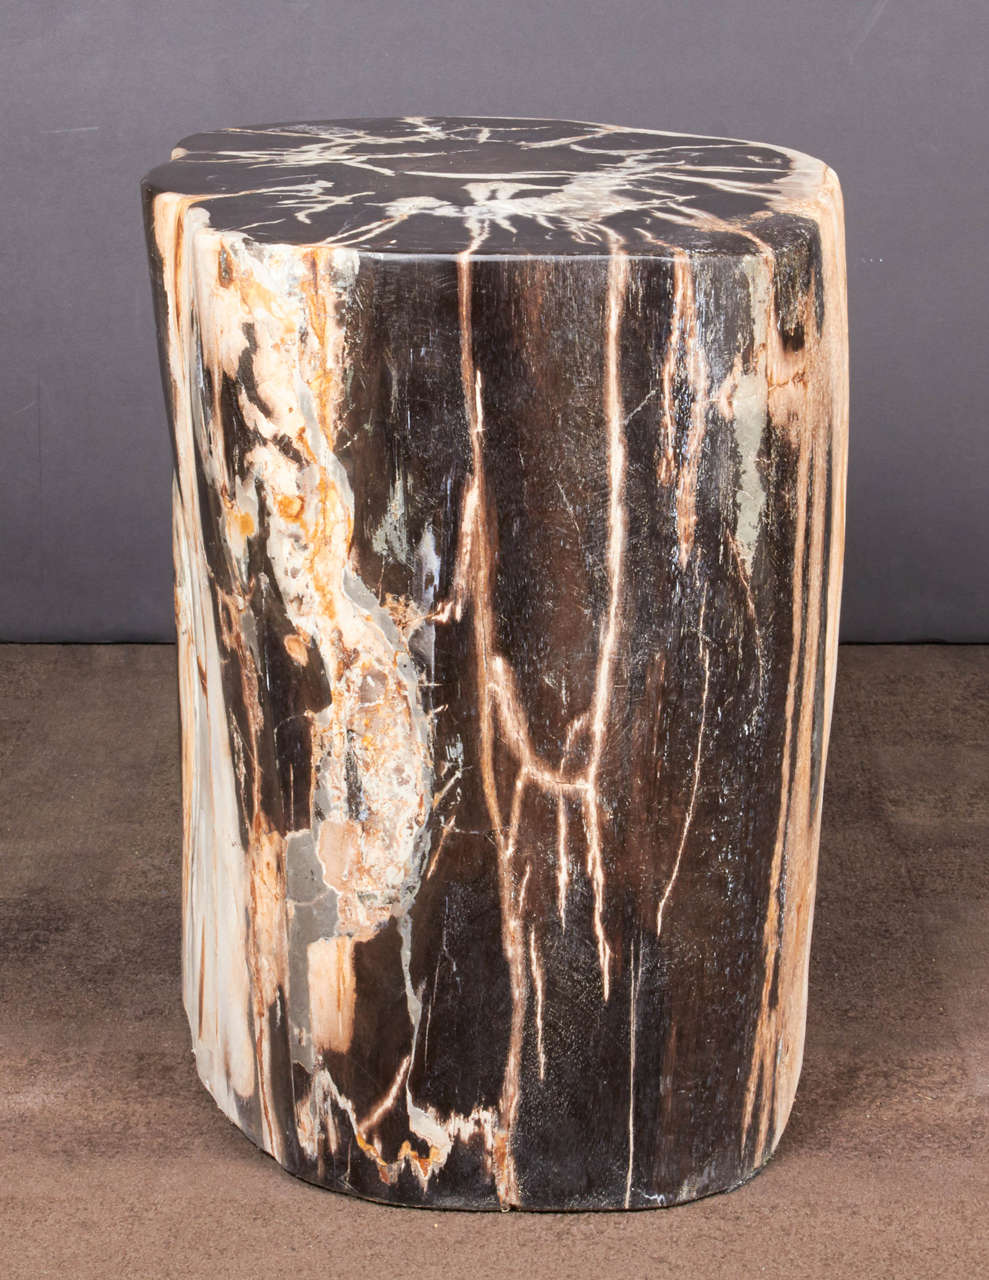 Indonesian Exquisite Petrified Wood Side Table with Natural Striped Top